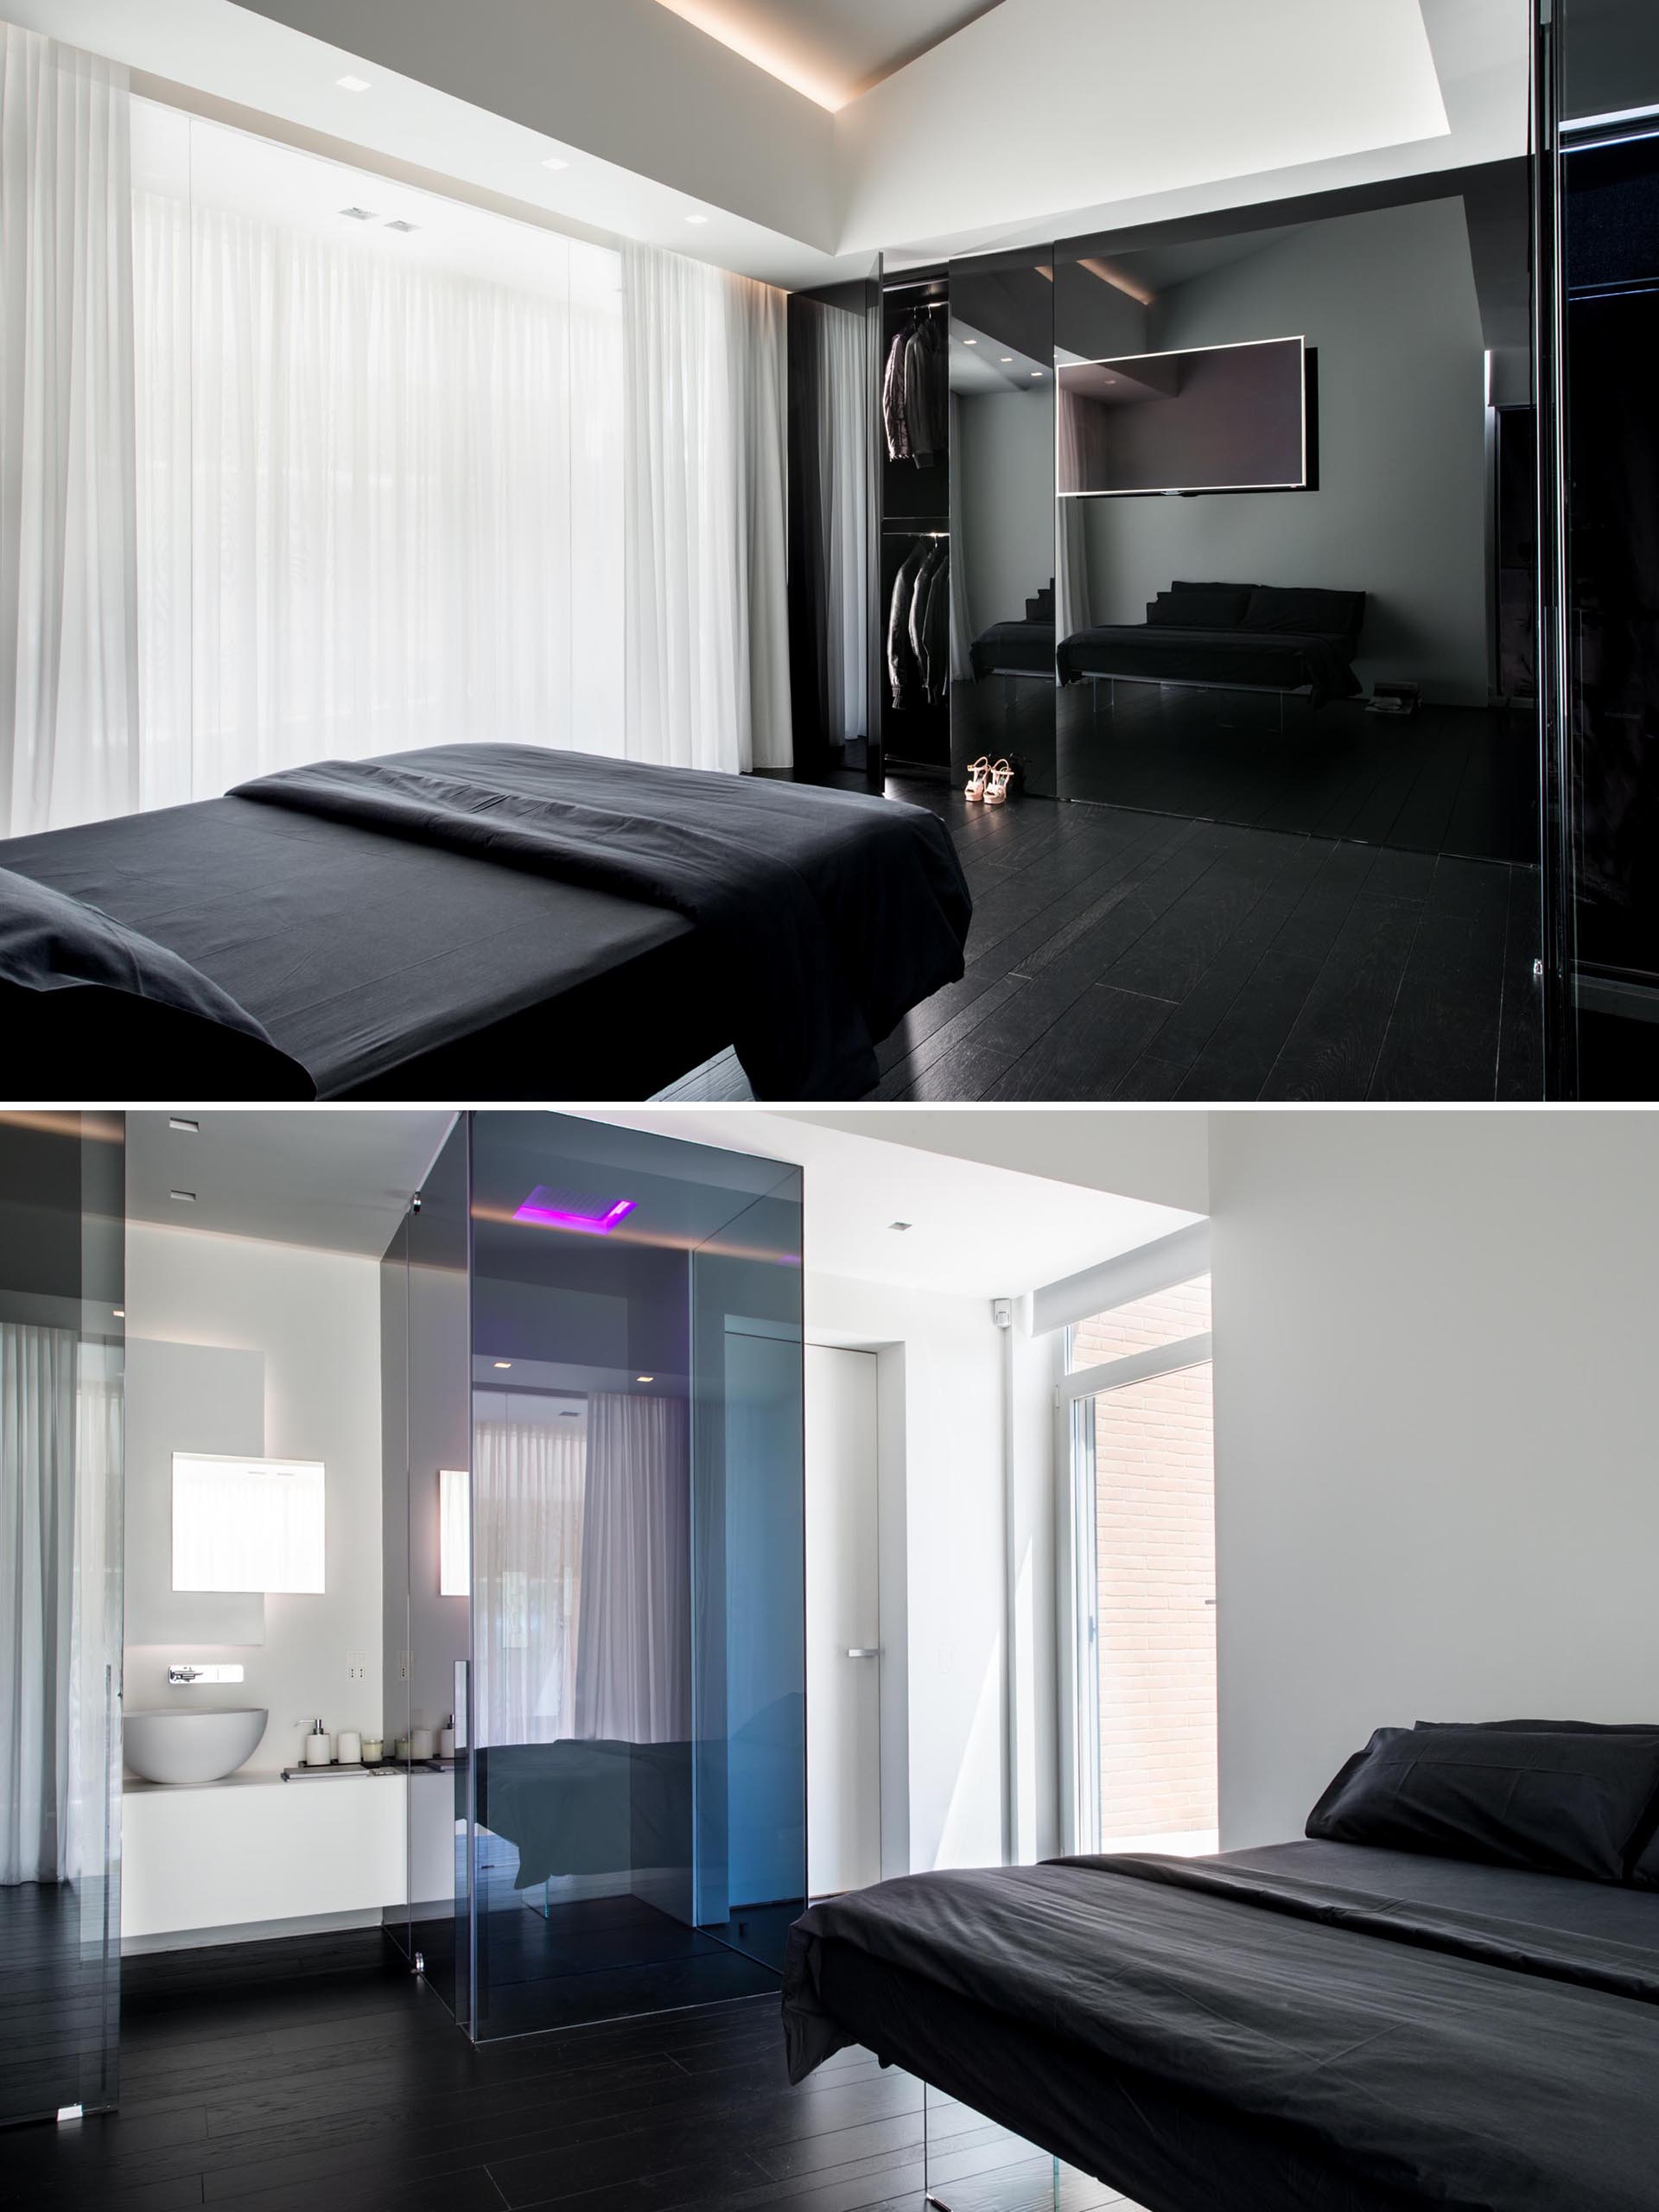 A modern bedroom with a black bed, white walls, and an en-suite bathroom.